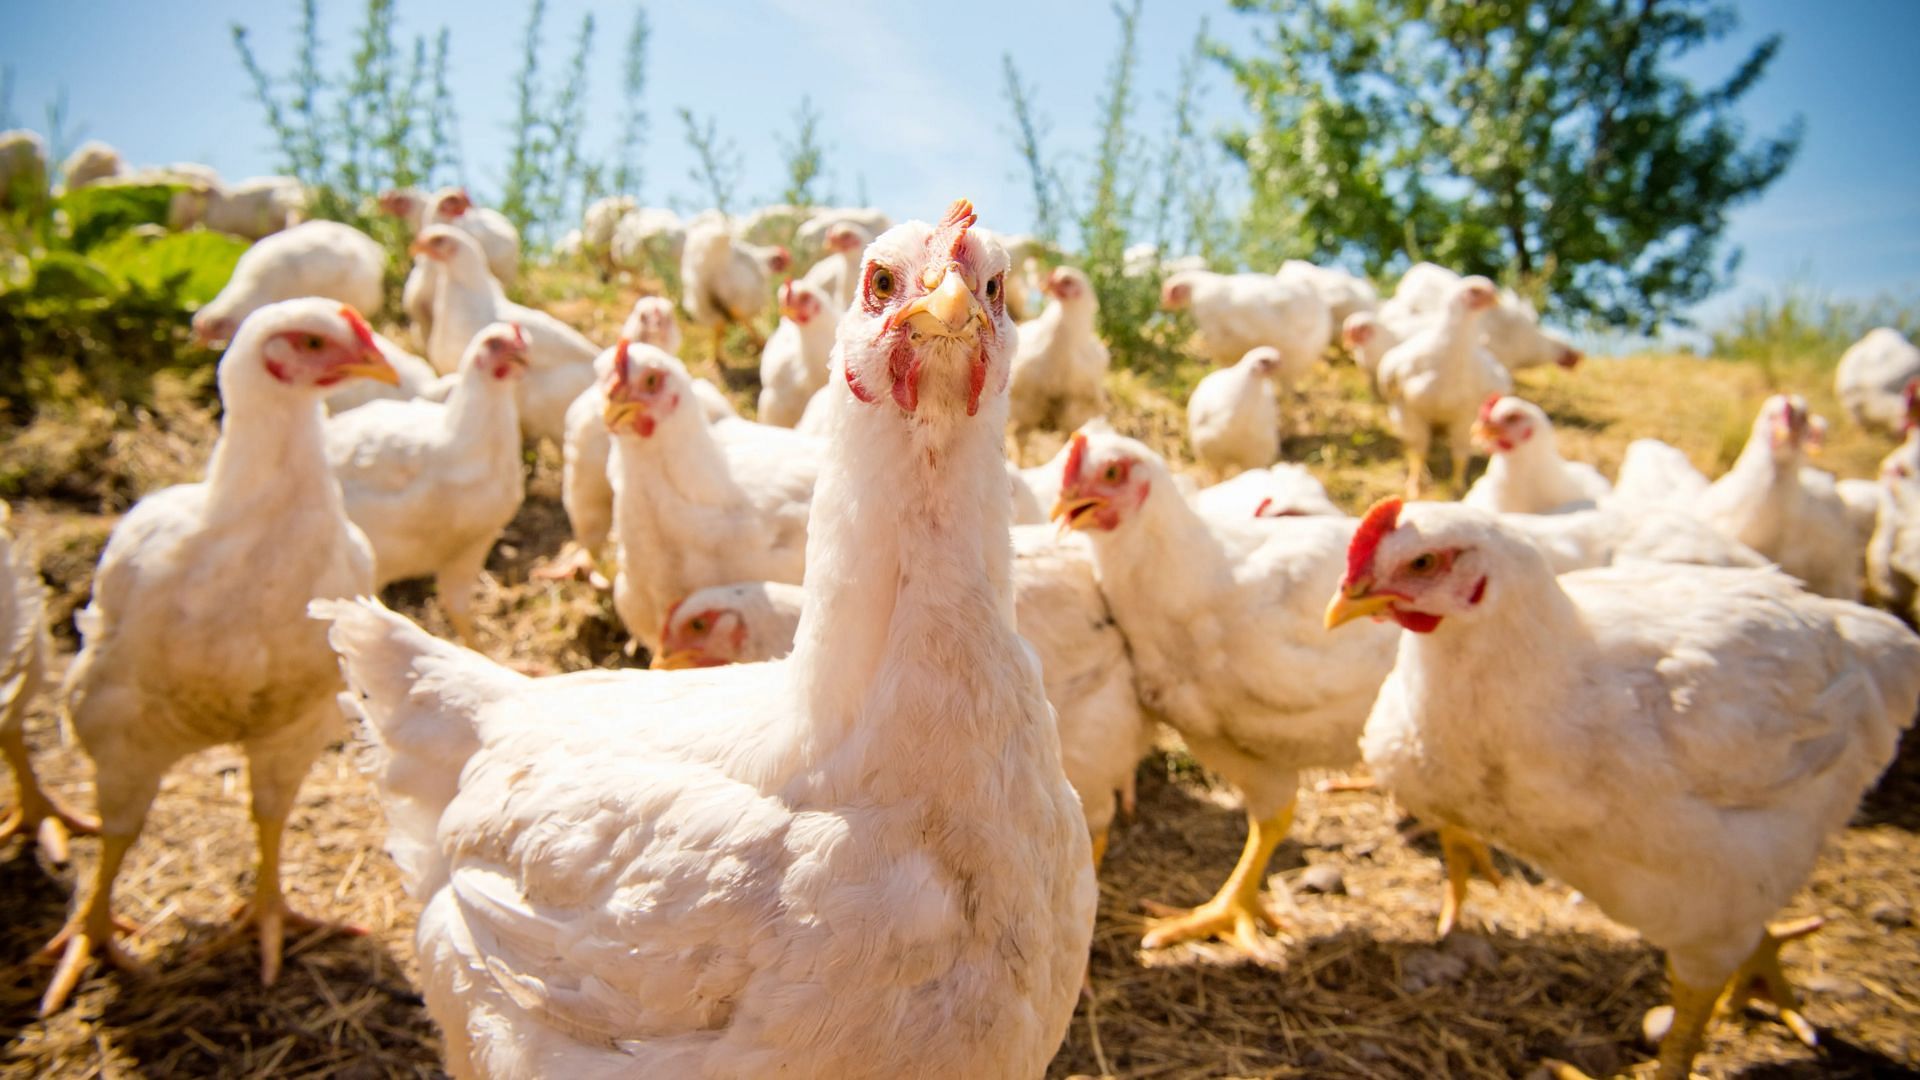 Hillandale Farms&#039; is one of the top five egg producers in the United States (Image via Stephen Simpson/Getty Images)